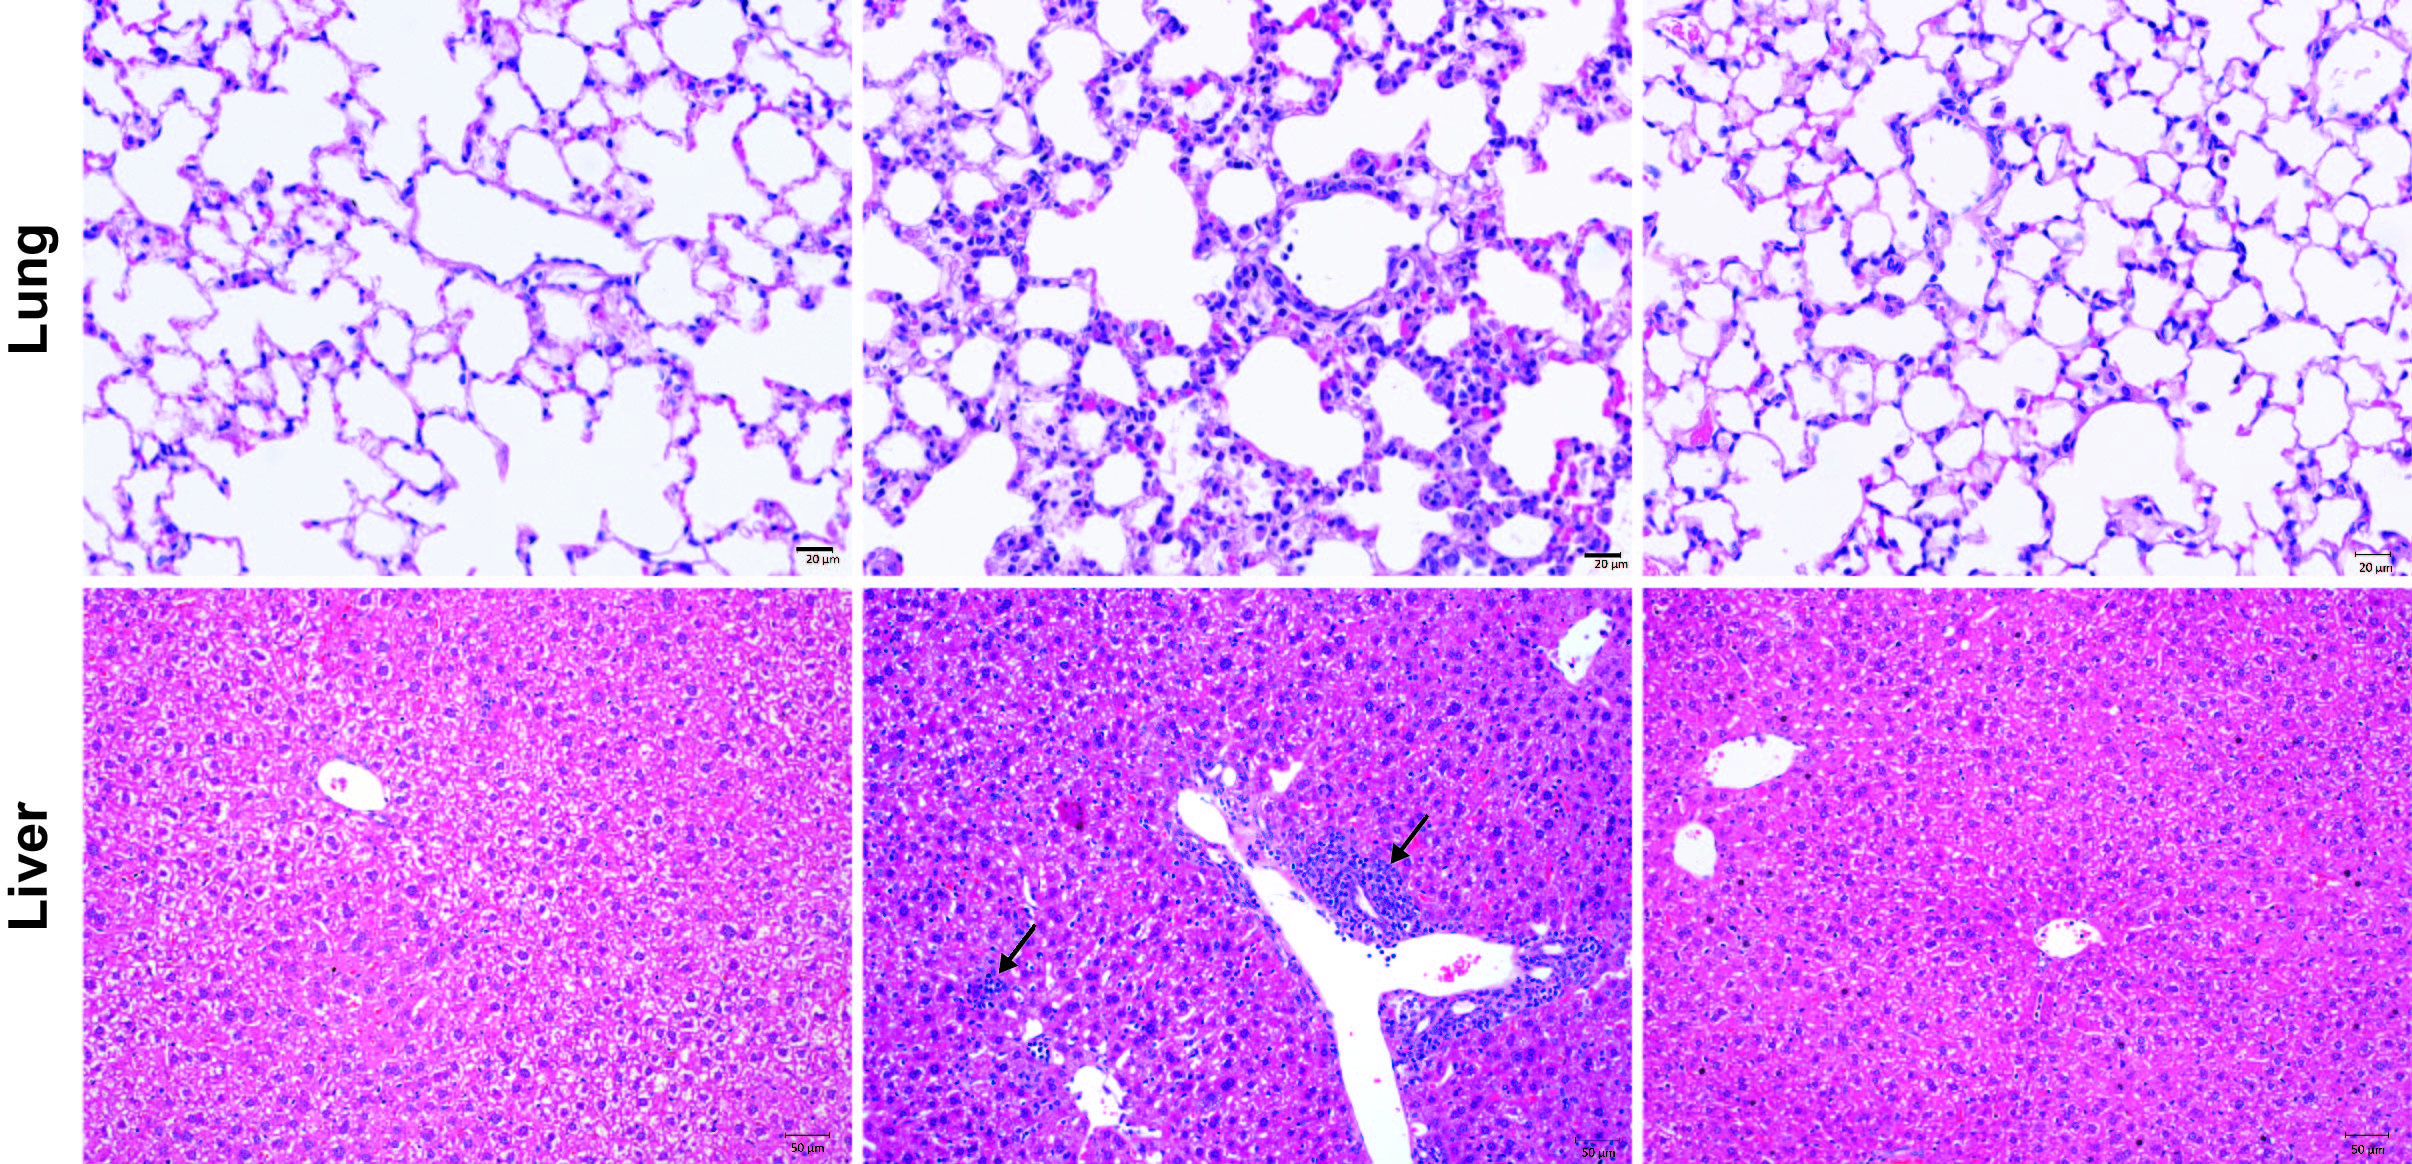 Microscope images of lung and liver tissue